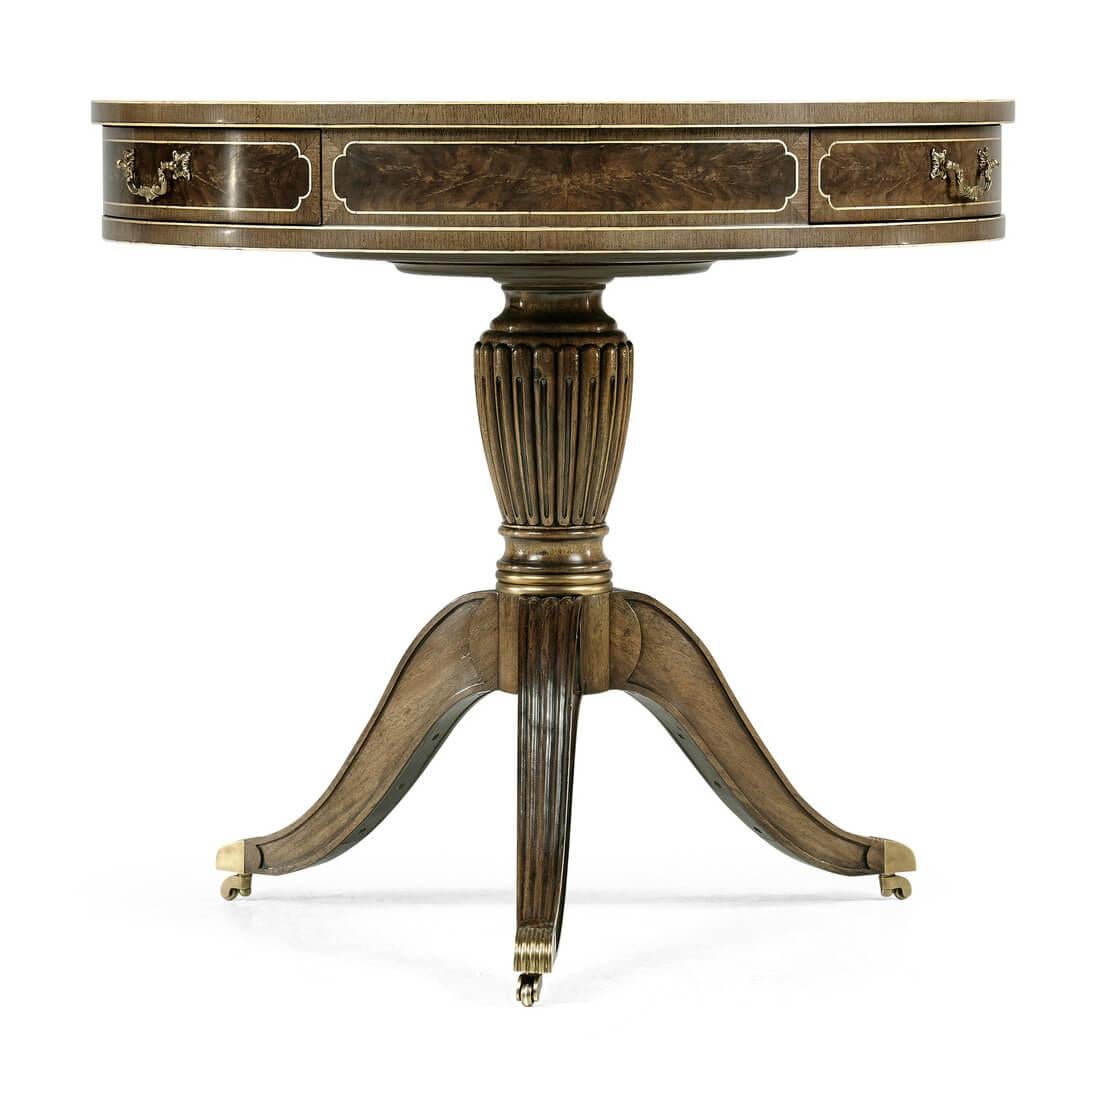 English Regency style bleached mahogany drum table with a tooled leather inset top, figured crotch mahogany-paneled crossbanding with three frieze drawers each with brass handles above a reeded pedestal with three splay reeded legs raised on brass